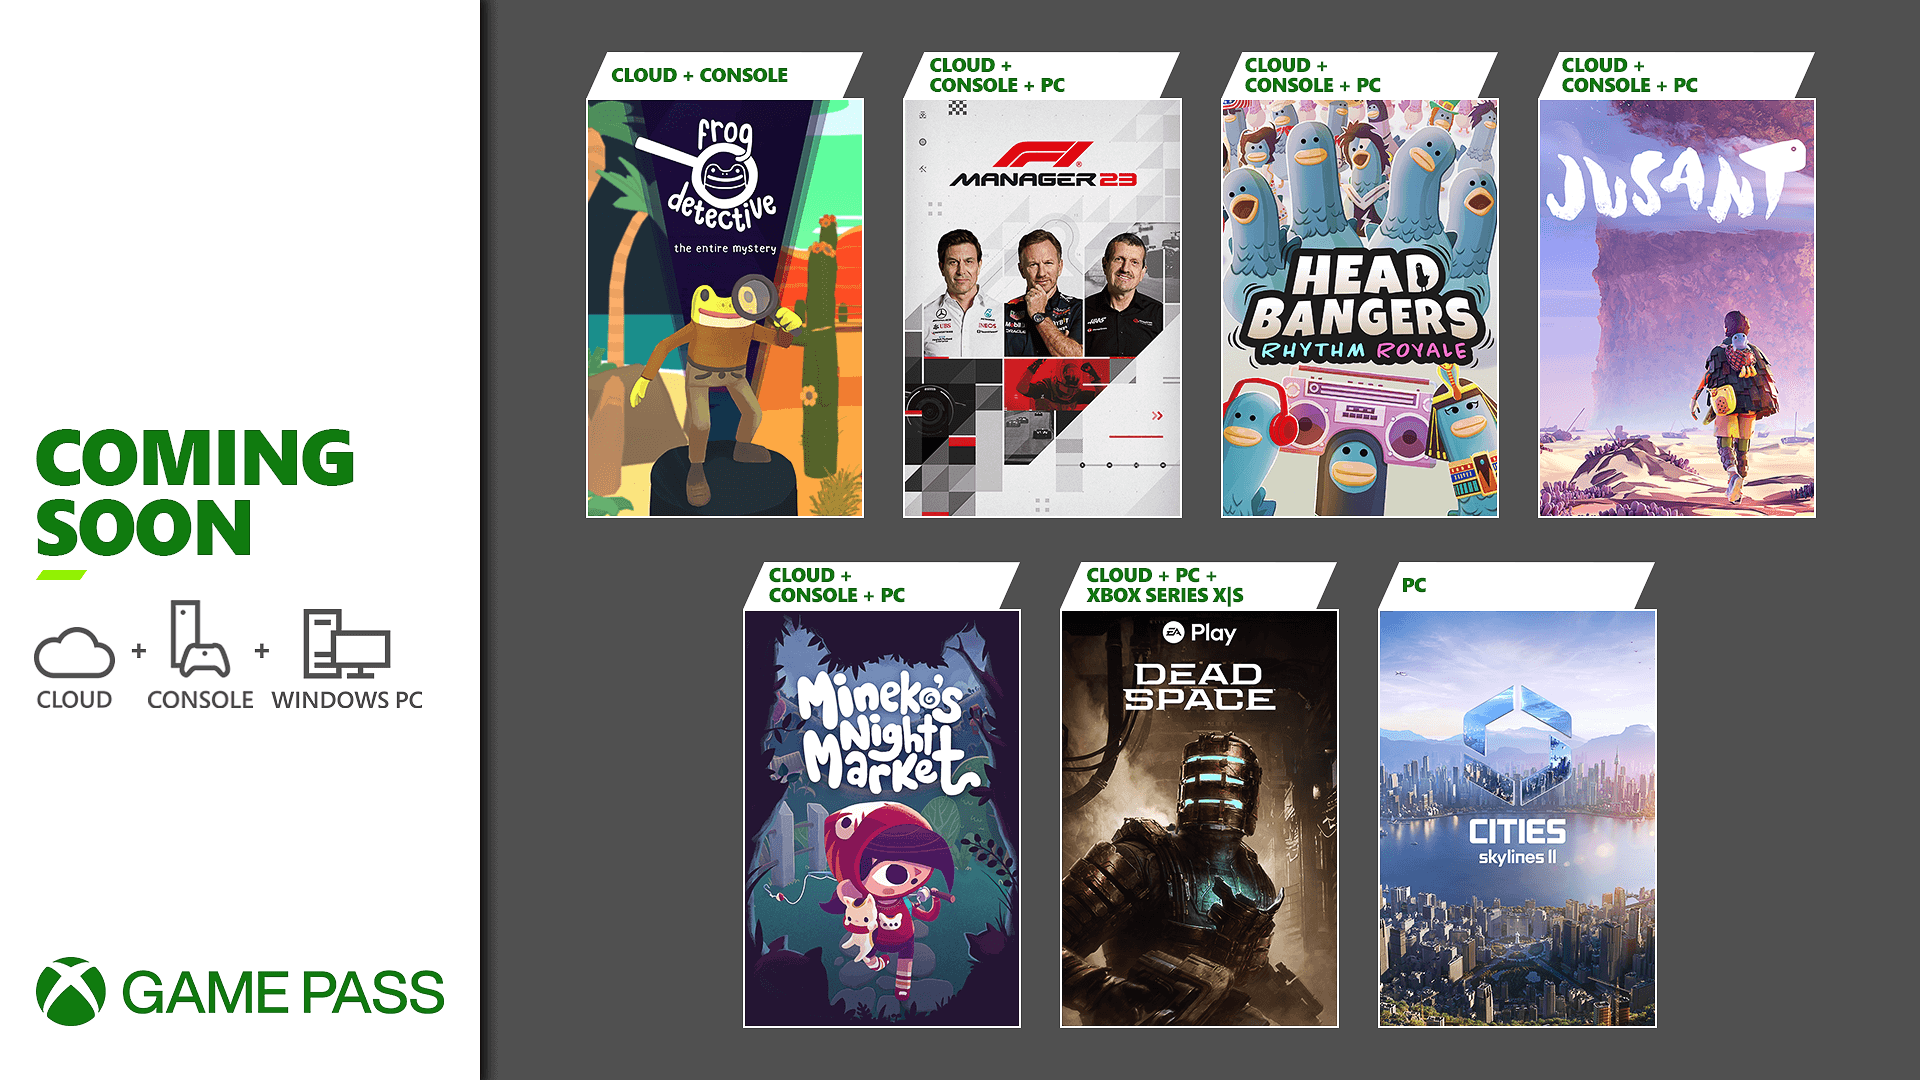 Frog Detective: The Entire Mystery, F1 Manager 23, Head Bangers: Rhythm Royale, Jusant, Mineko's Night Market, Dead Space, and Cities Skylines II are coming soon to Xbox Game Pass.